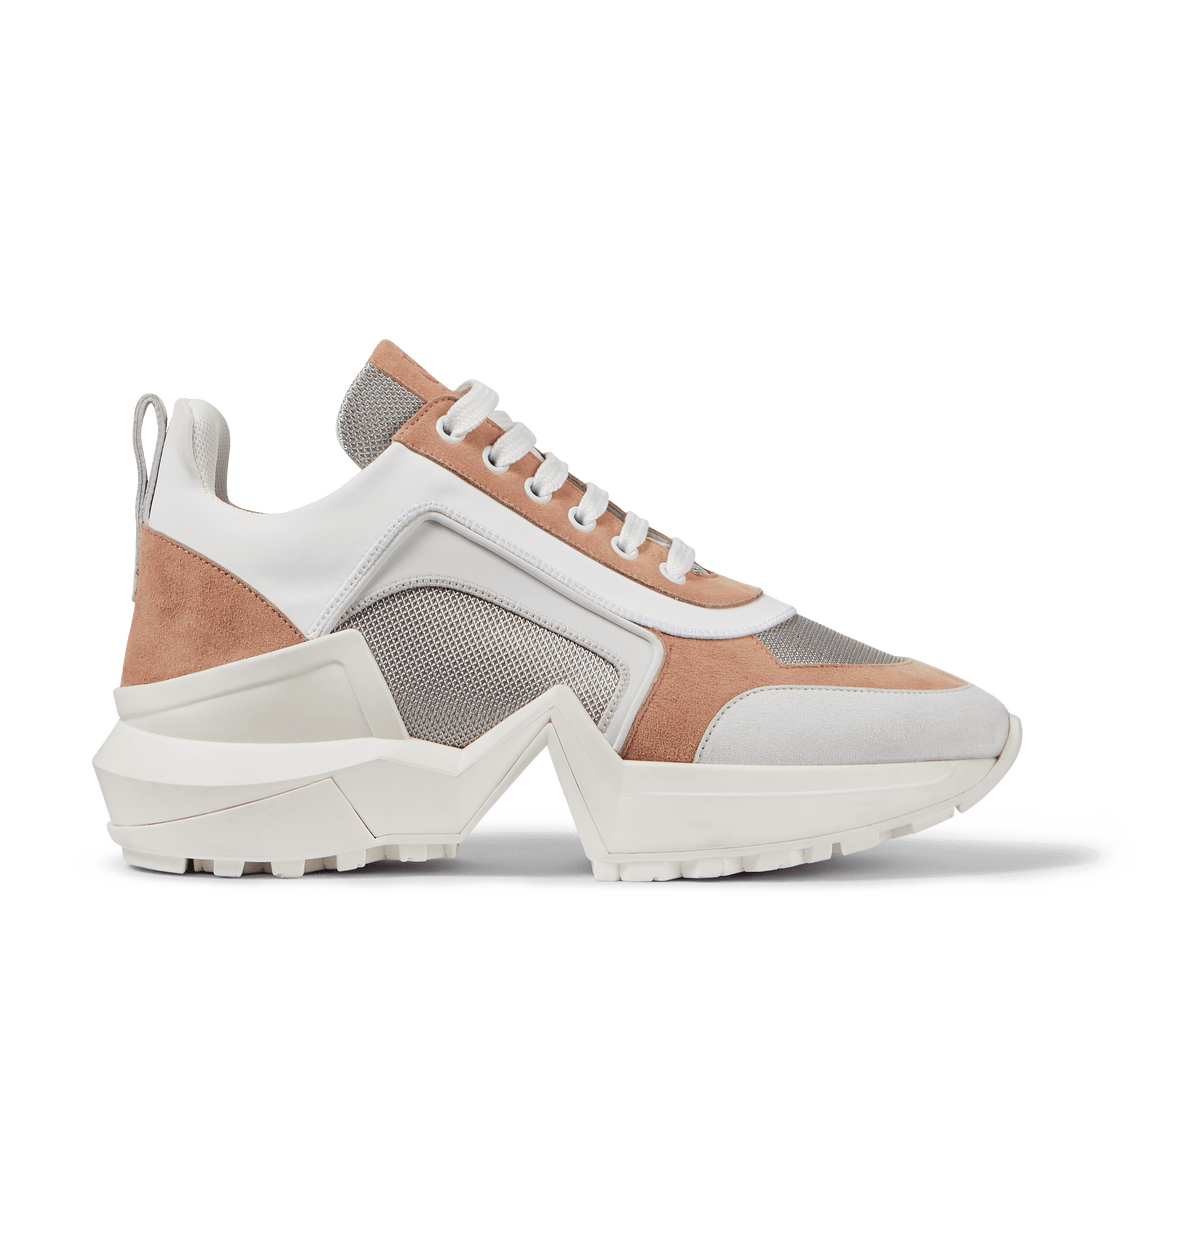 Tan and Silver Suede 4.0 Sneakers